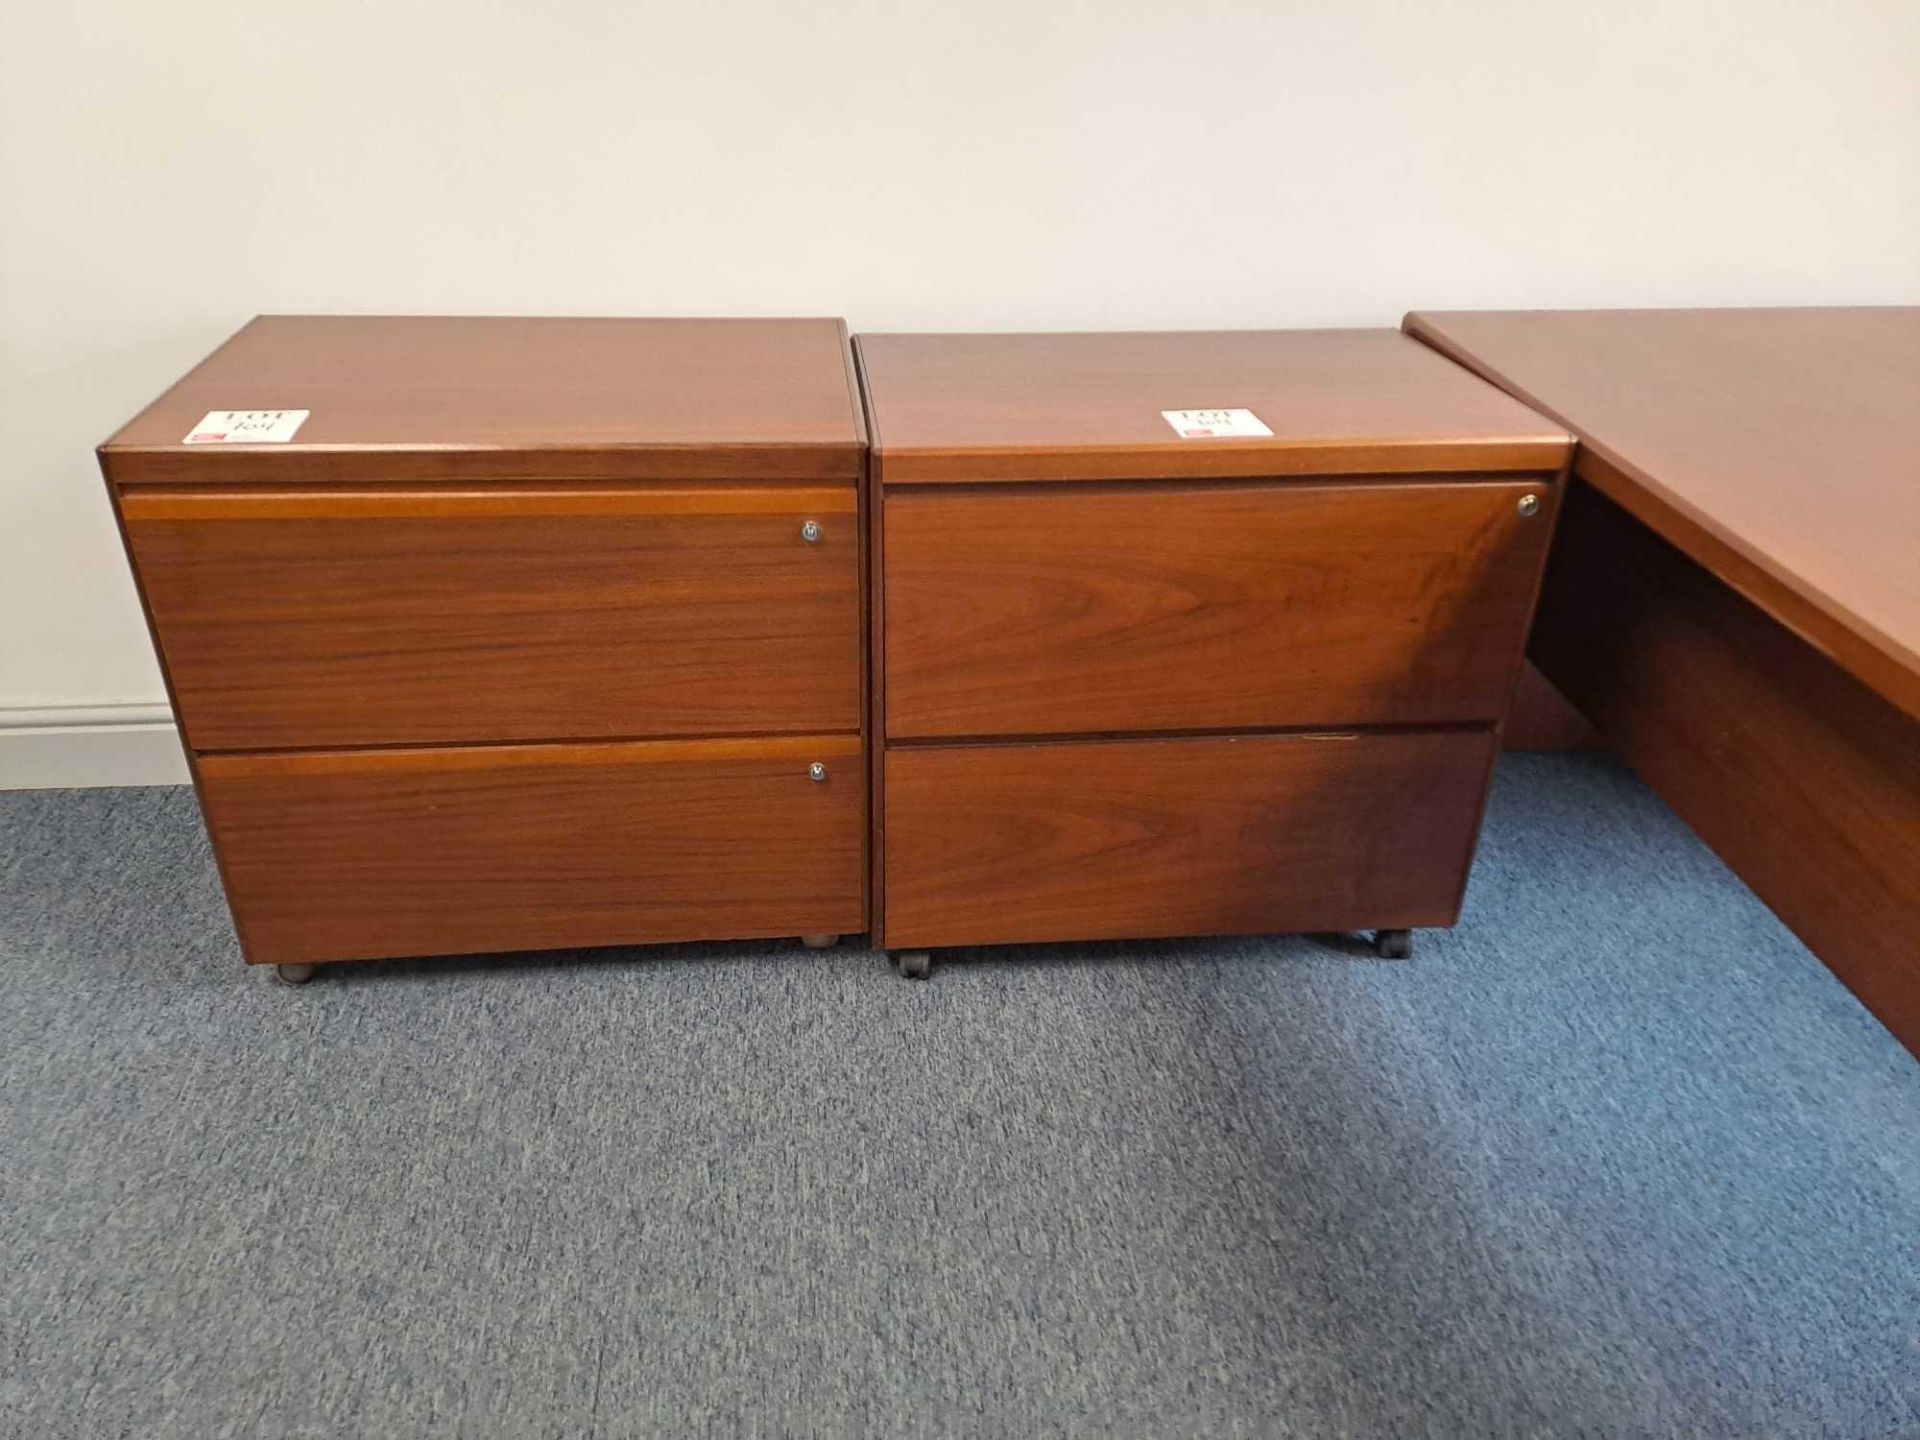 Large wooden desk with pedestal, two 2-door storage cupboards, one sideboard - Image 2 of 4